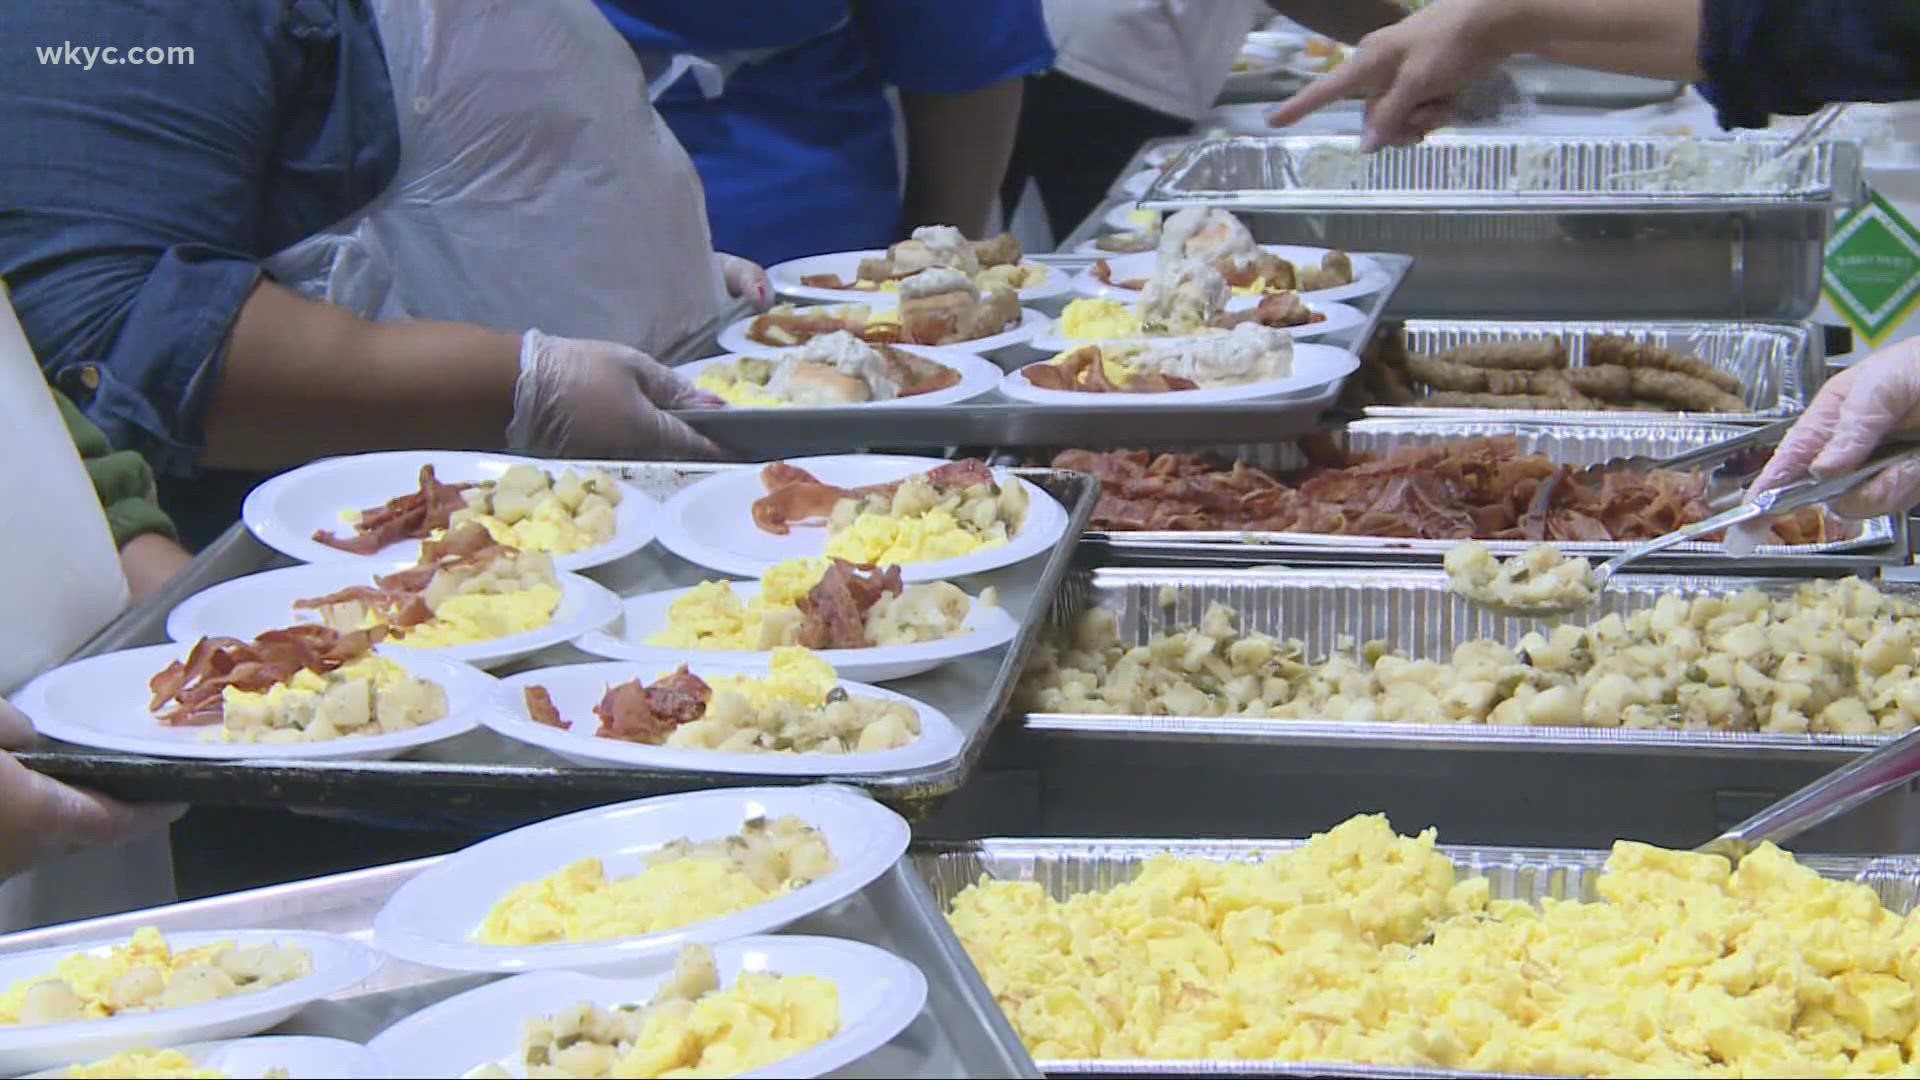 Several organizations in Northeast Ohio are providing food free of charge.